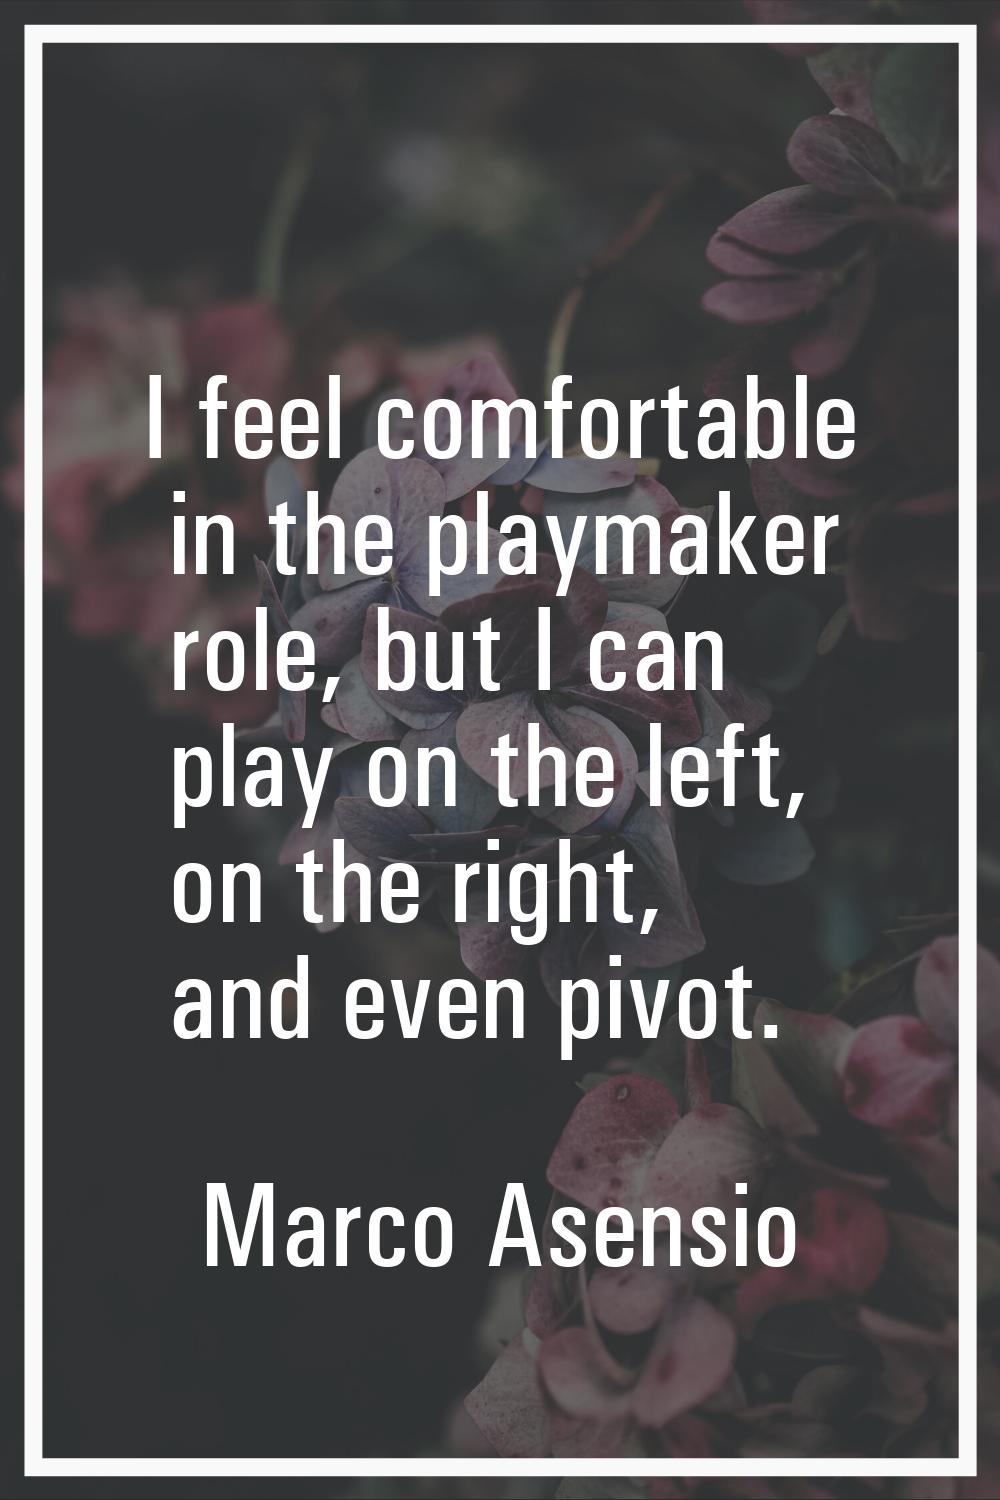 I feel comfortable in the playmaker role, but I can play on the left, on the right, and even pivot.